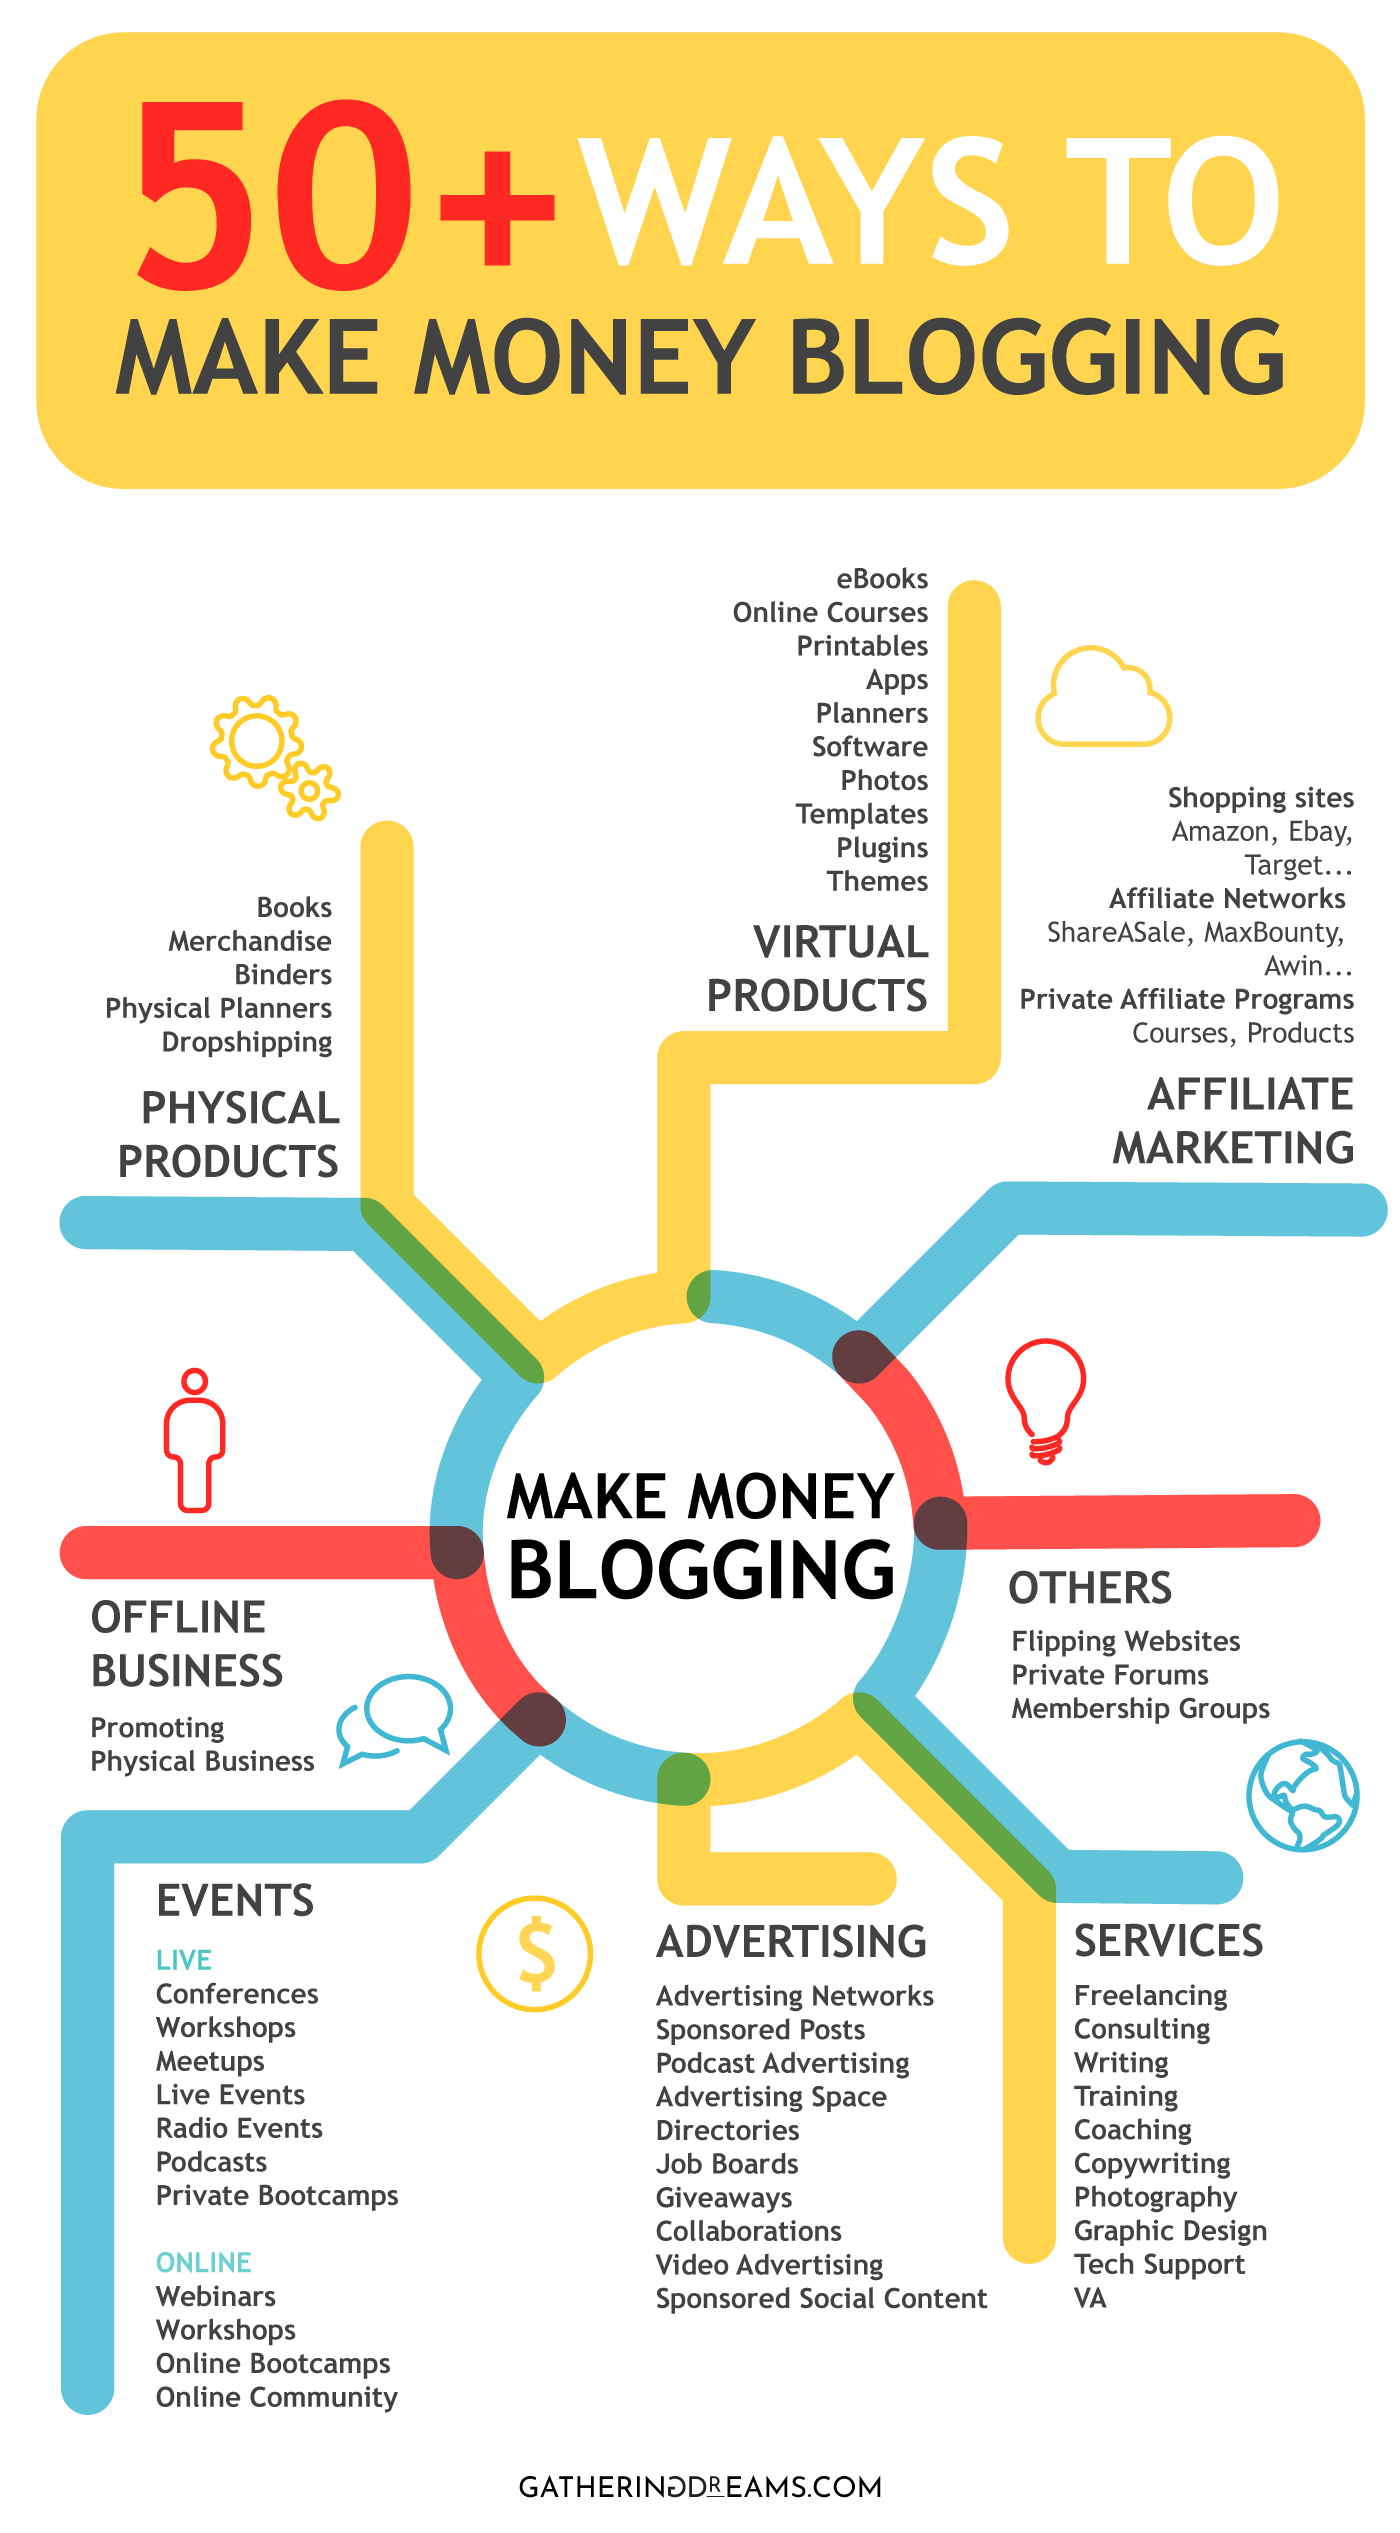 How To Make Money Blogging (In No Time) - Gathering Dreams